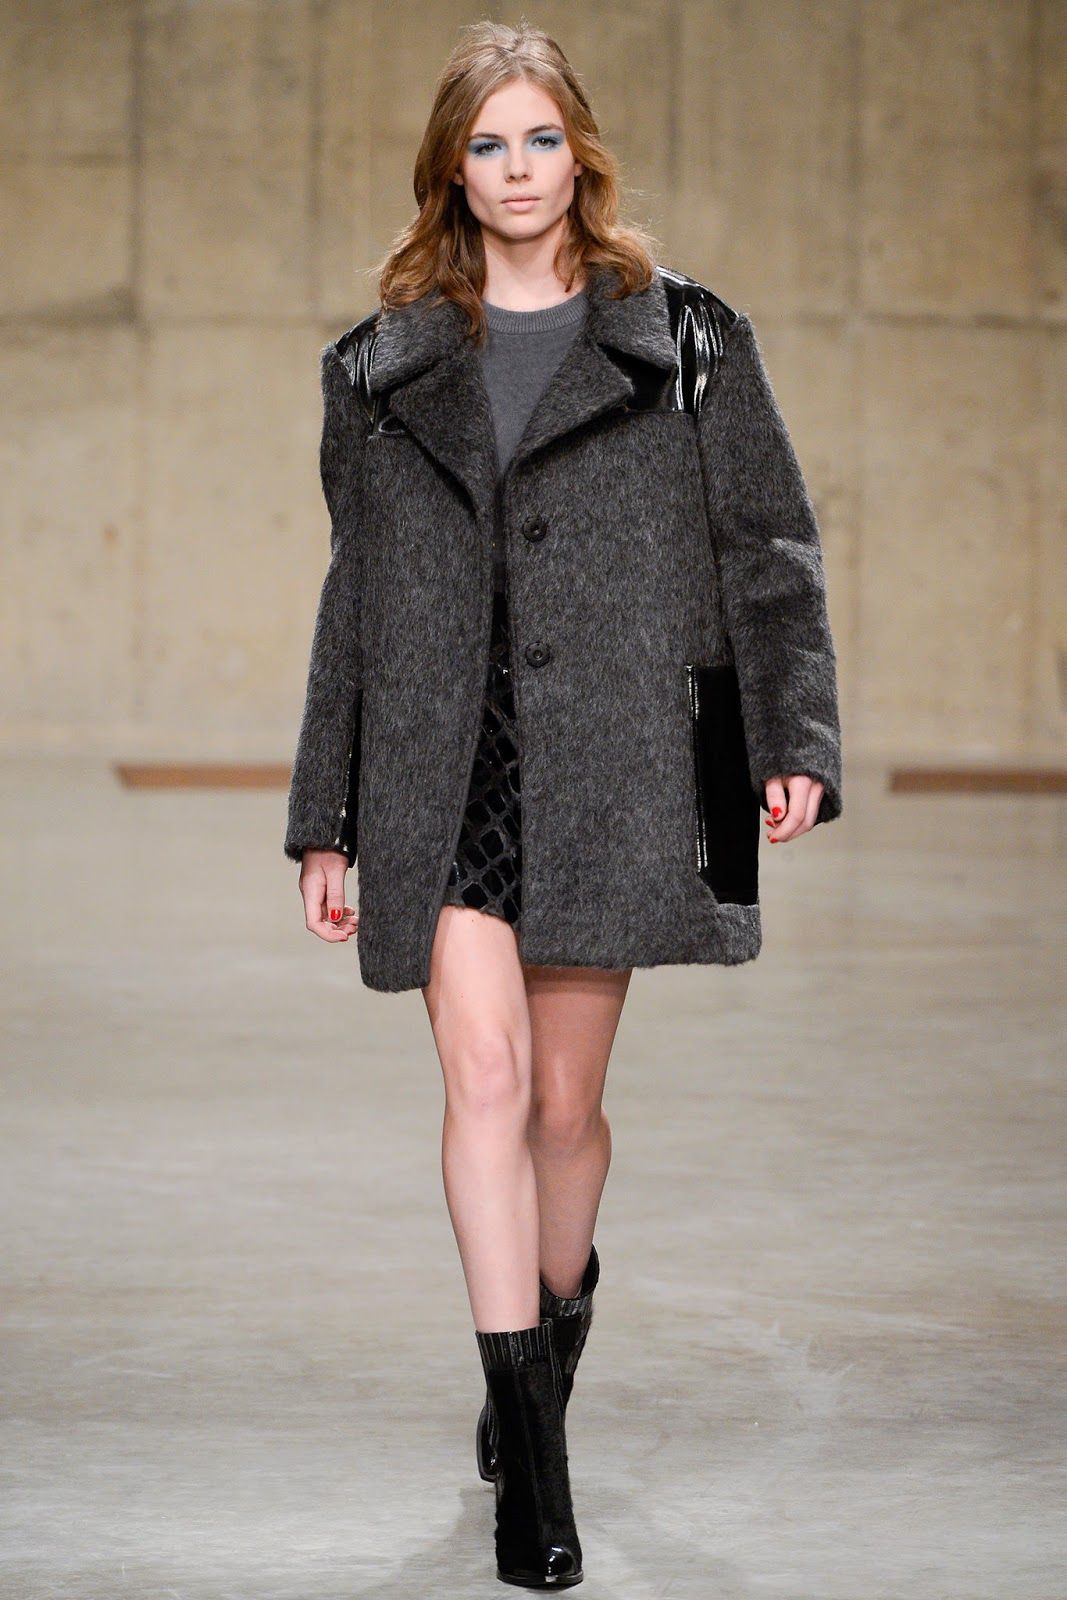 Topshop Unique Fall/Winter 2013 collection – London Fashion Week | Fab ...